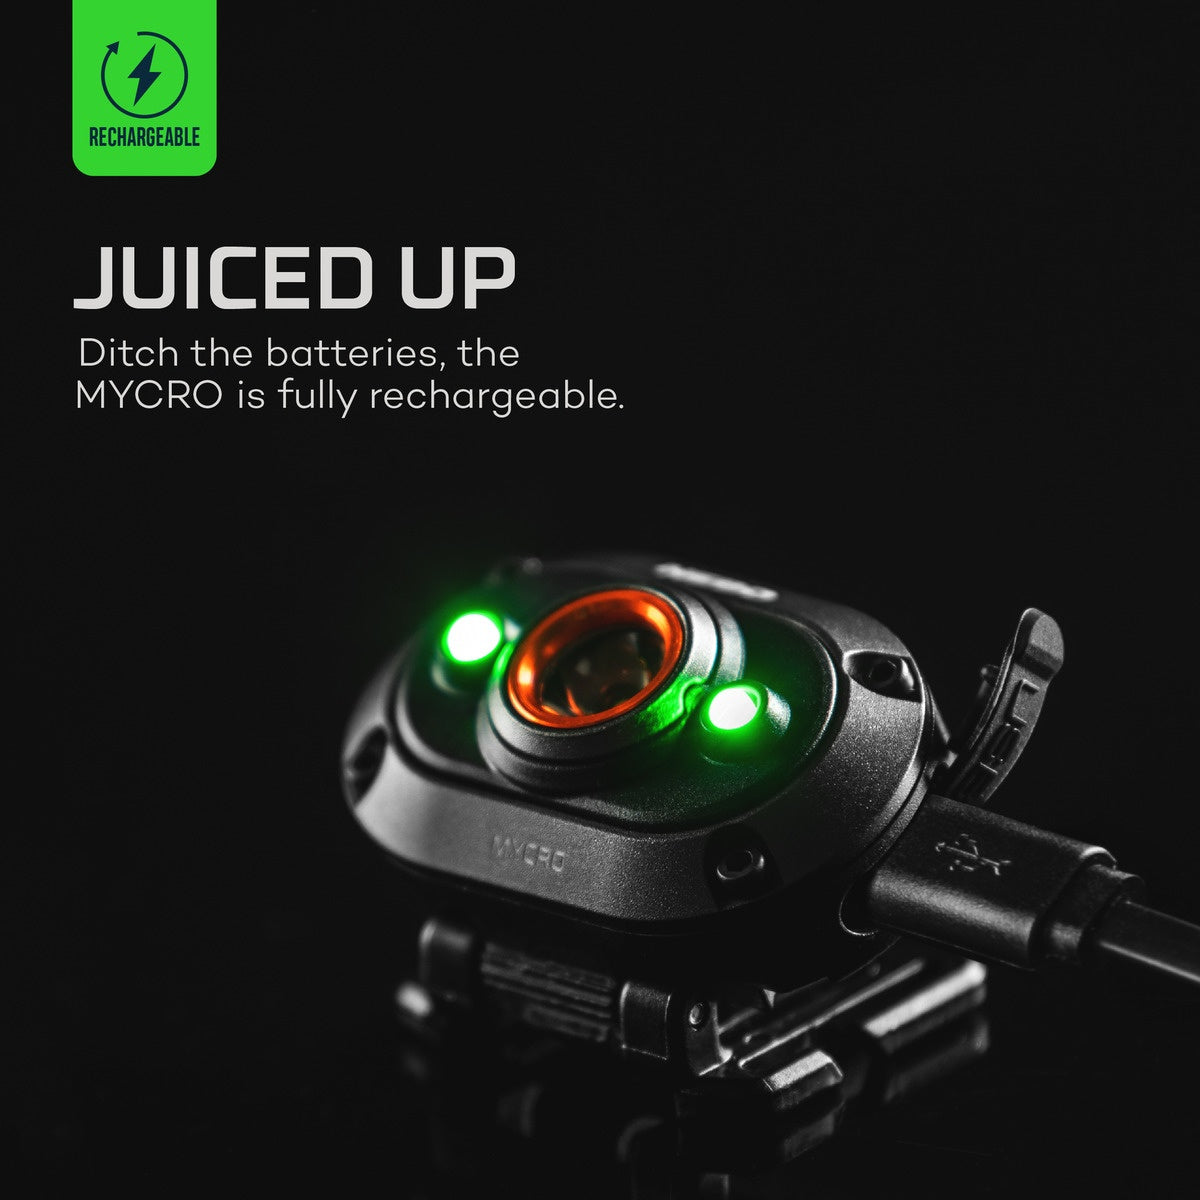 nebo mycro rc rechargeable headlamp for sale near roswell new mexico at hawkes outdoors 2102512882